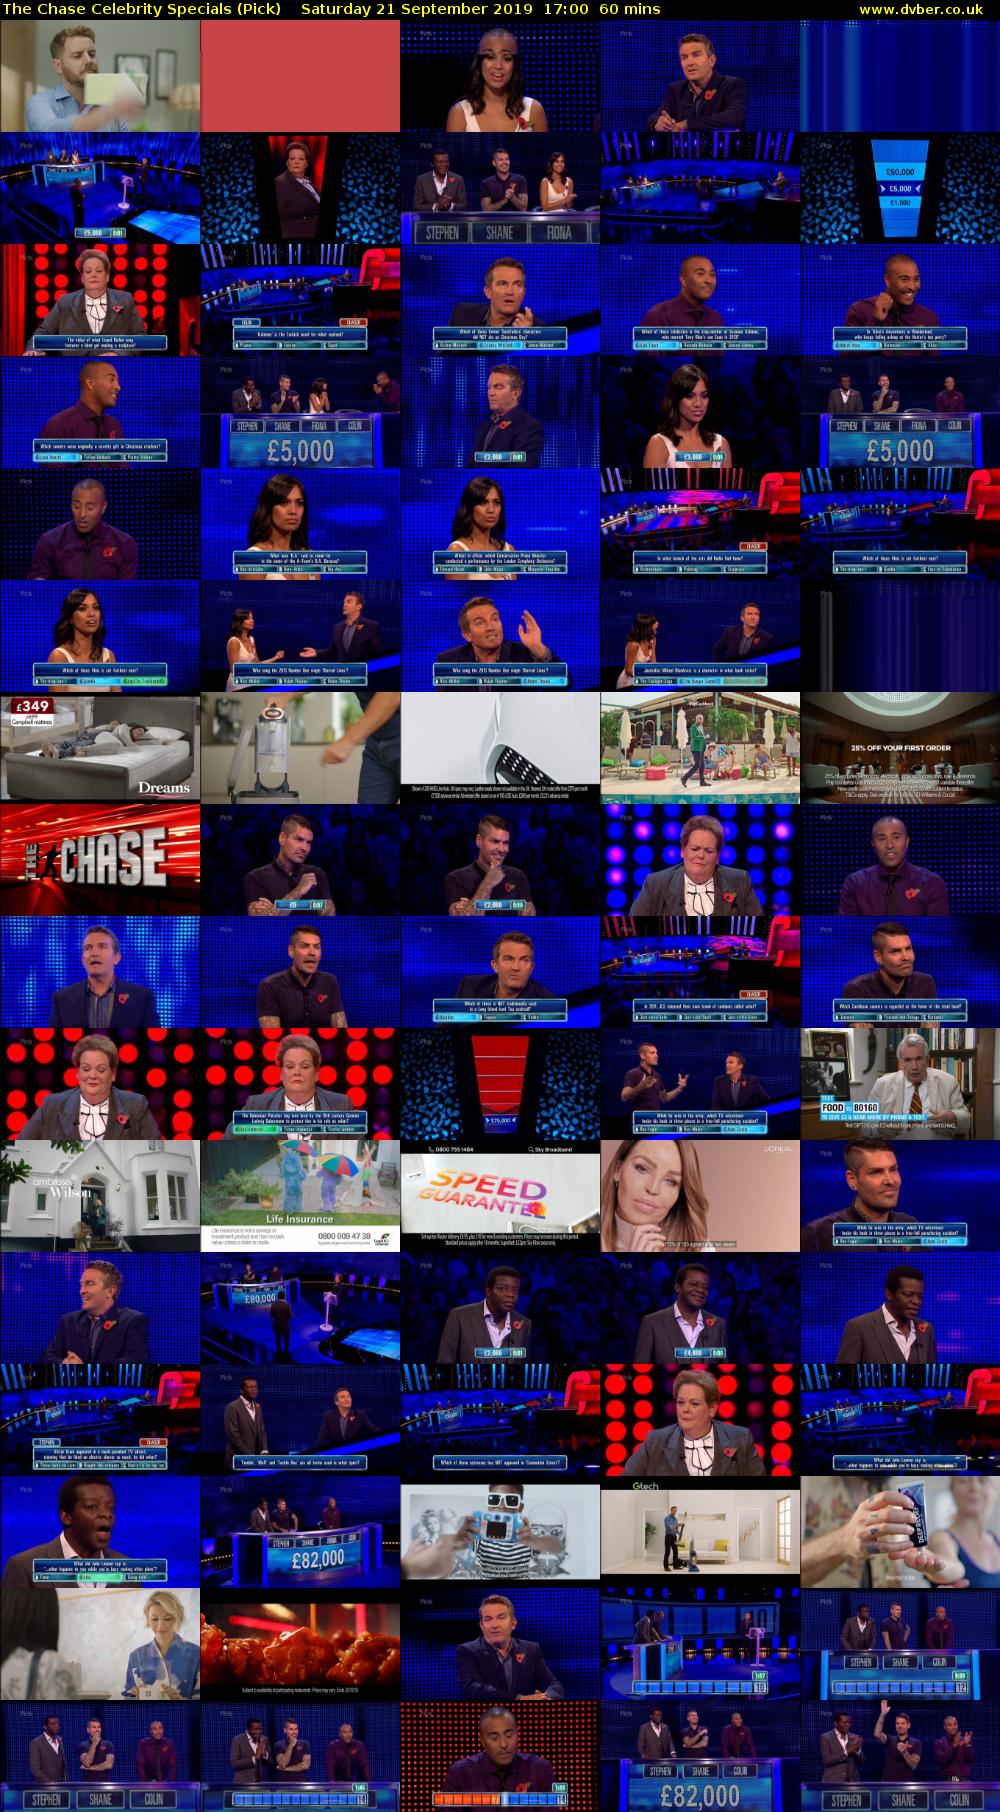 The Chase Celebrity Specials (Pick) Saturday 21 September 2019 17:00 - 18:00